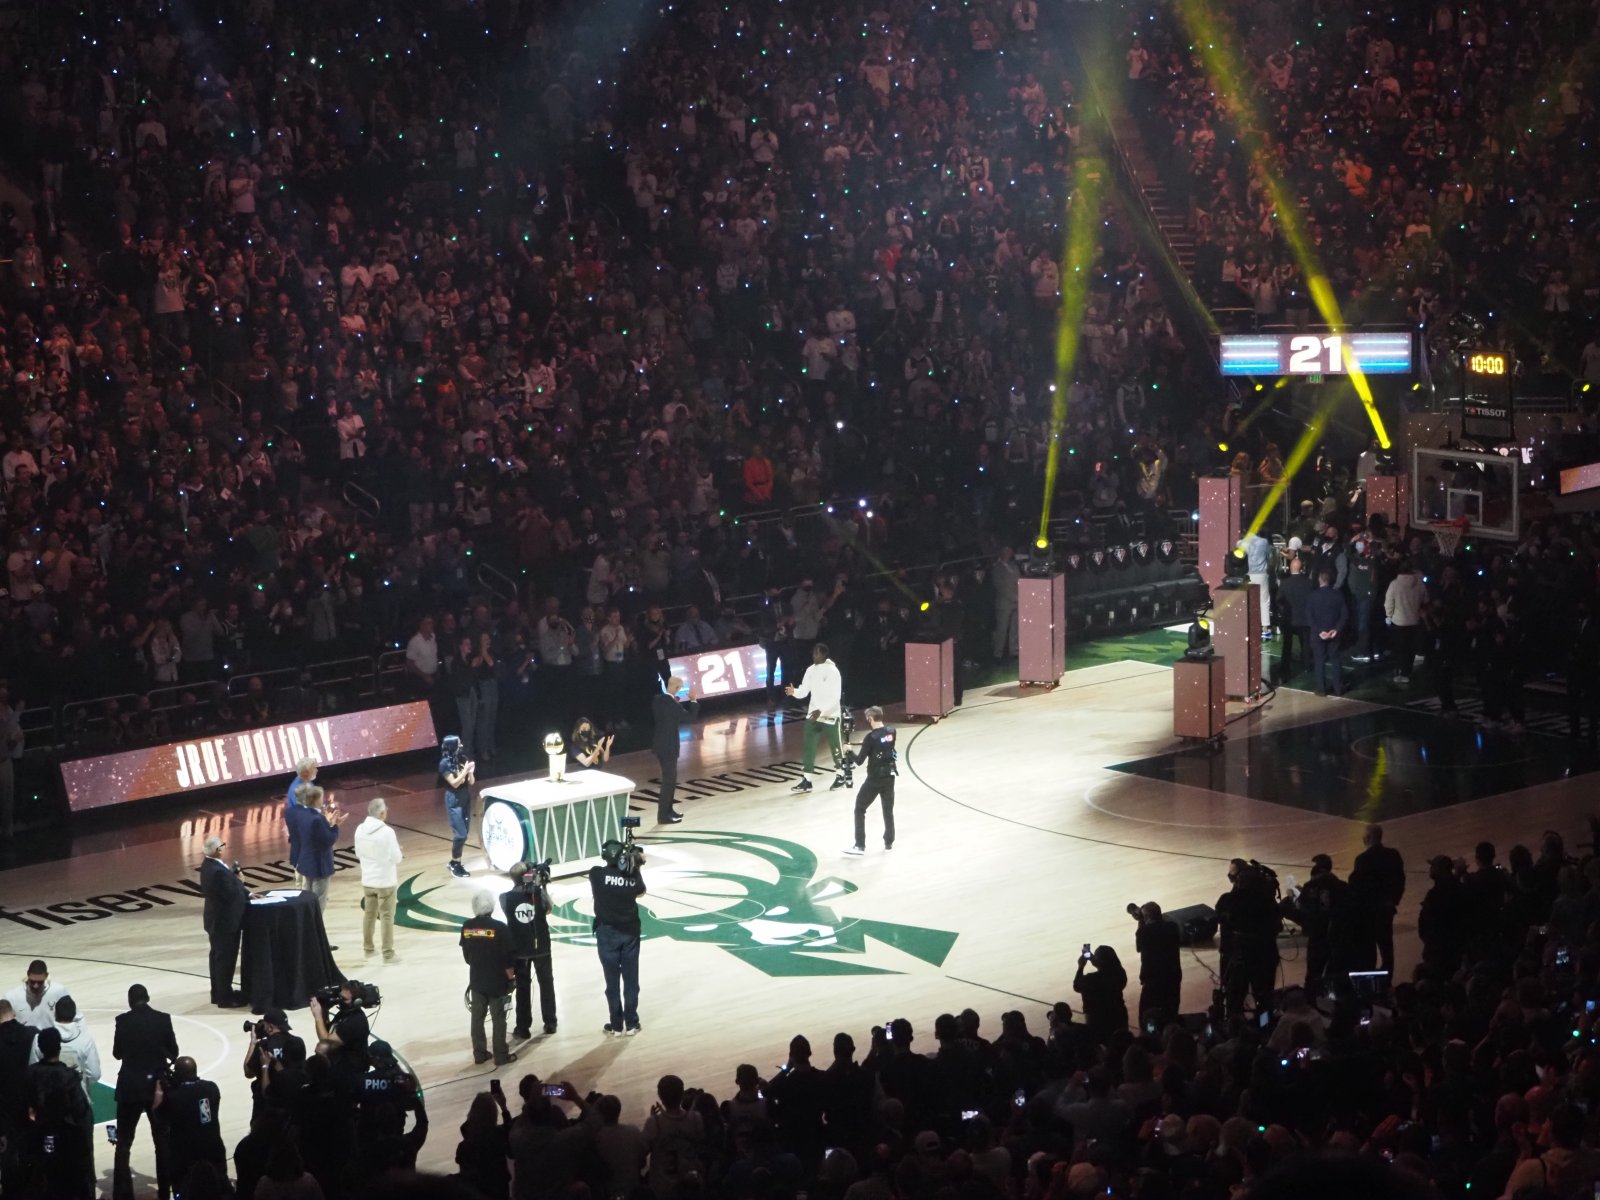 Relive the Bucks season opening win and ring ceremony [PHOTOS]